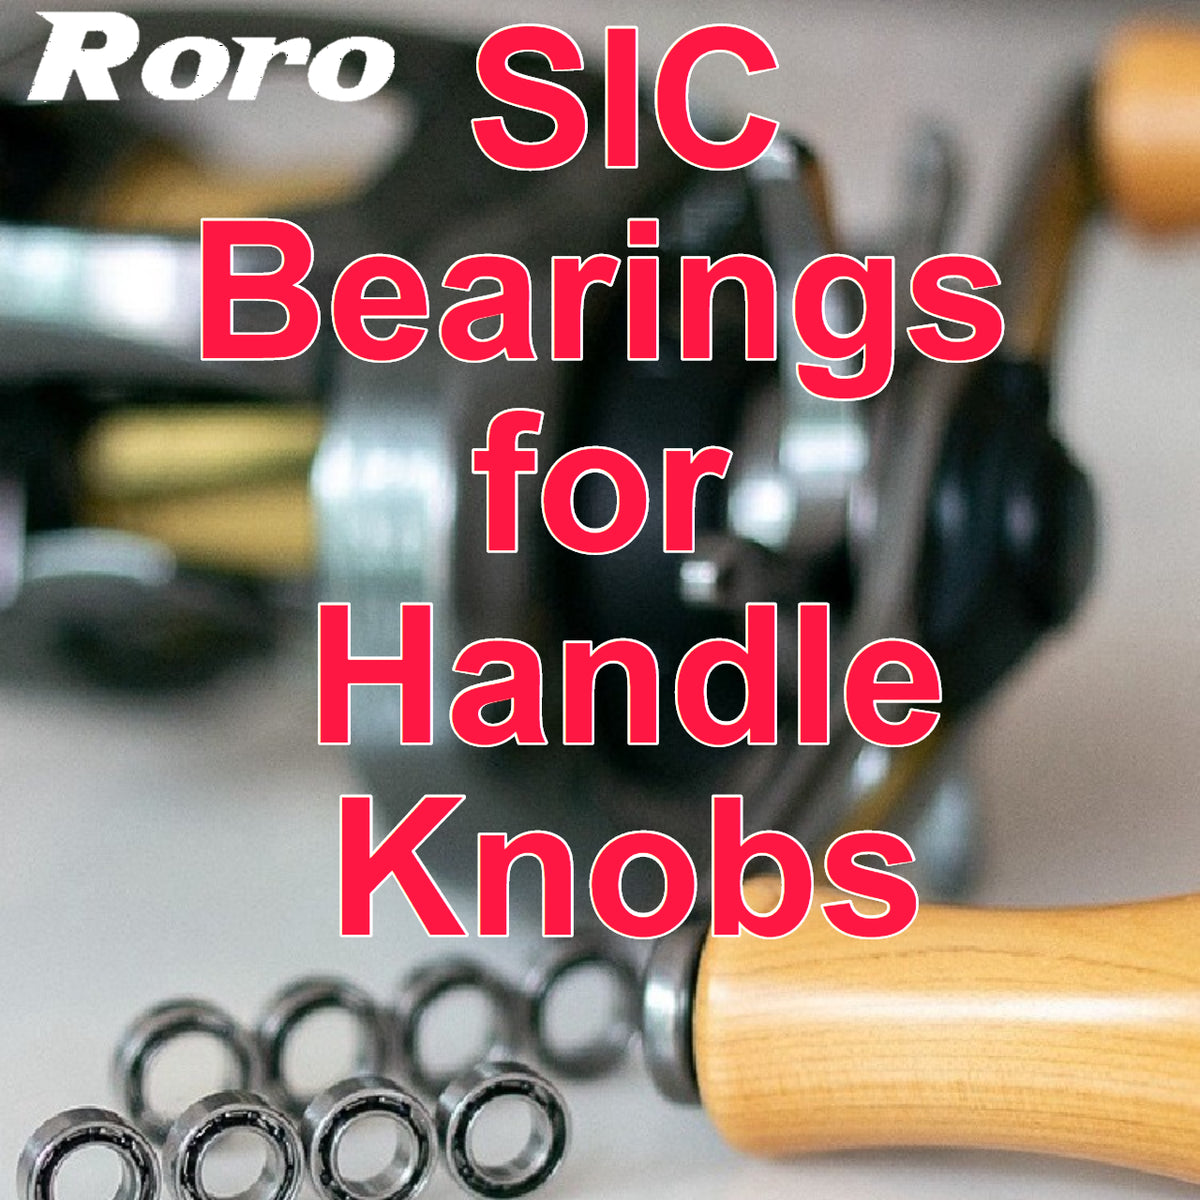 Roro SIC Bearings for Handle Knobs: Enhance Your BFS Reel